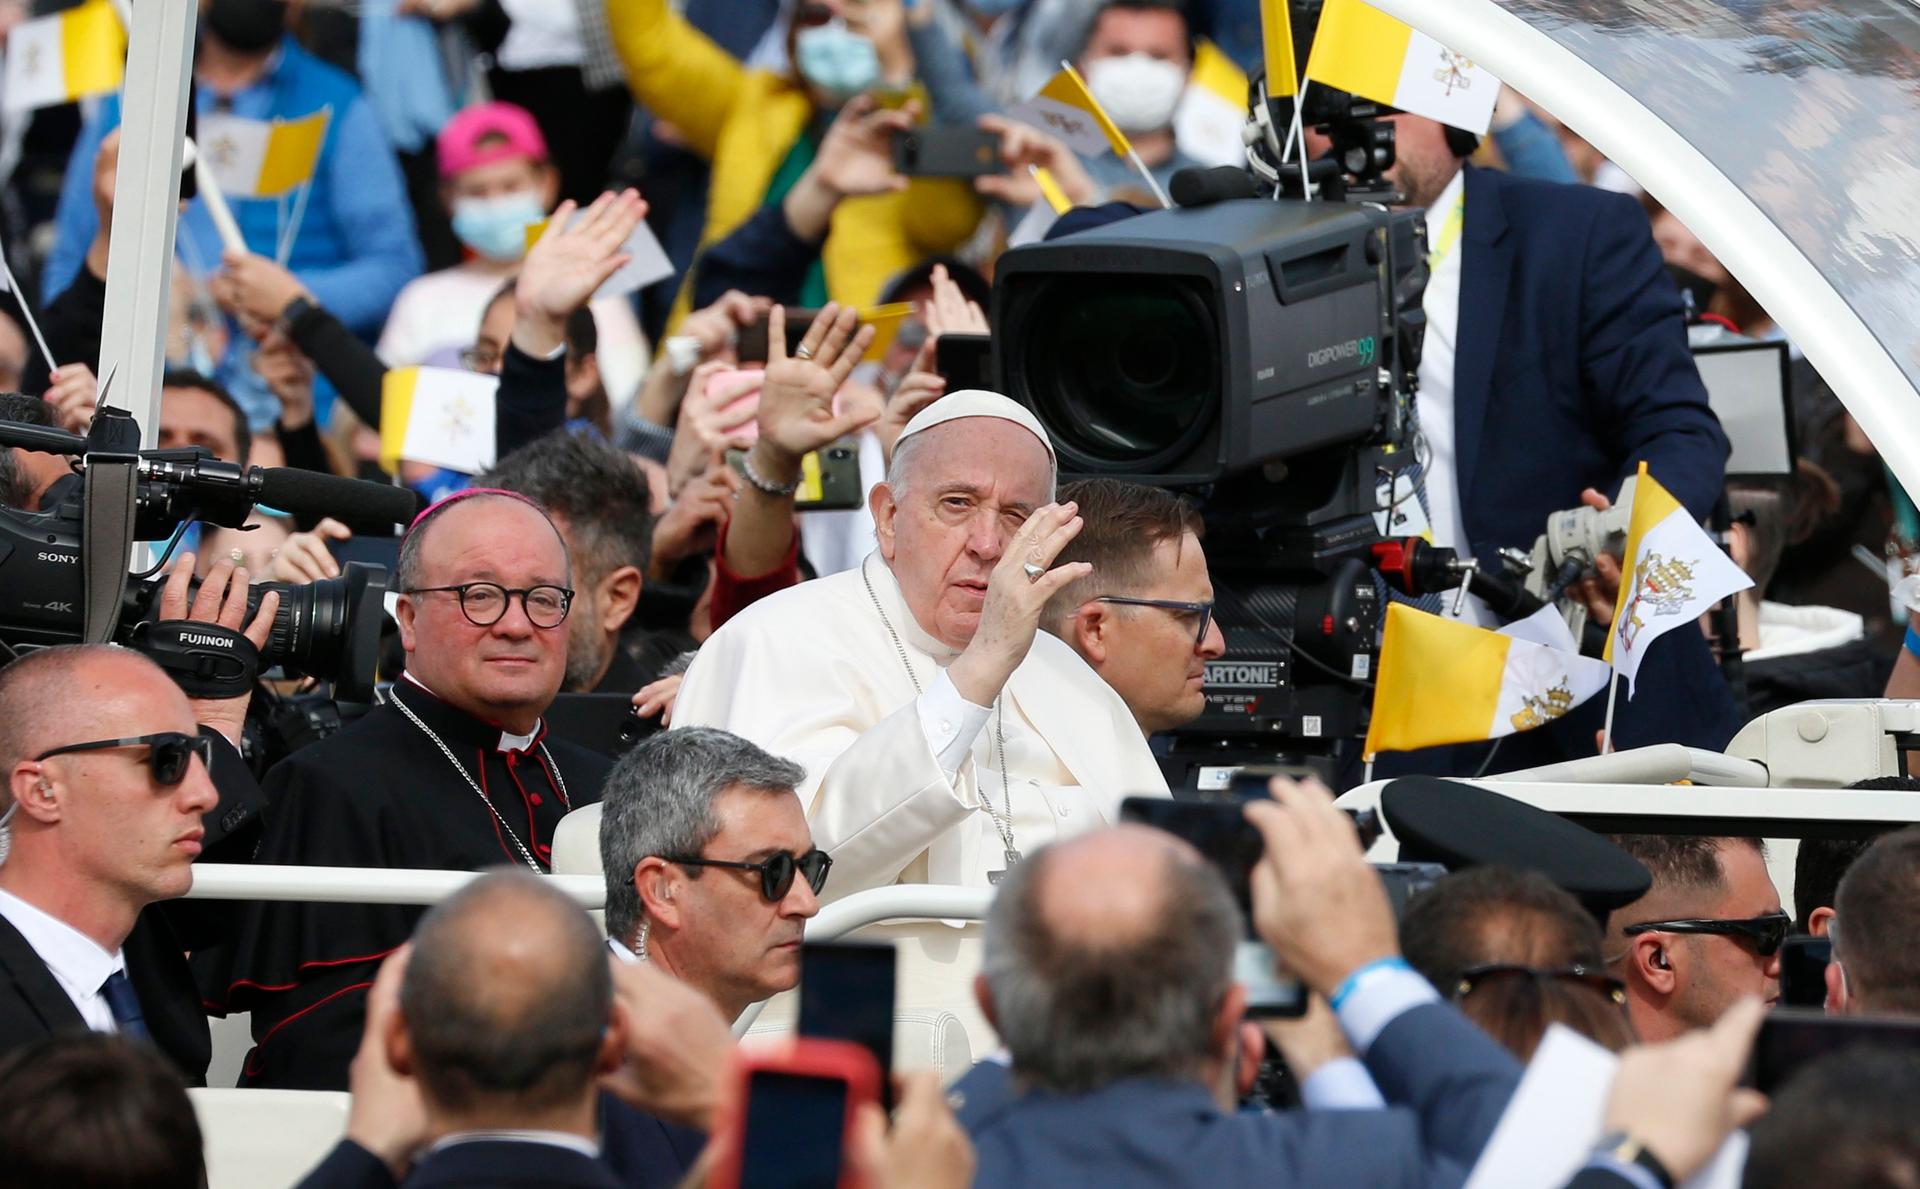 Church’s mission is not about numbers, but evangelizing, pope says